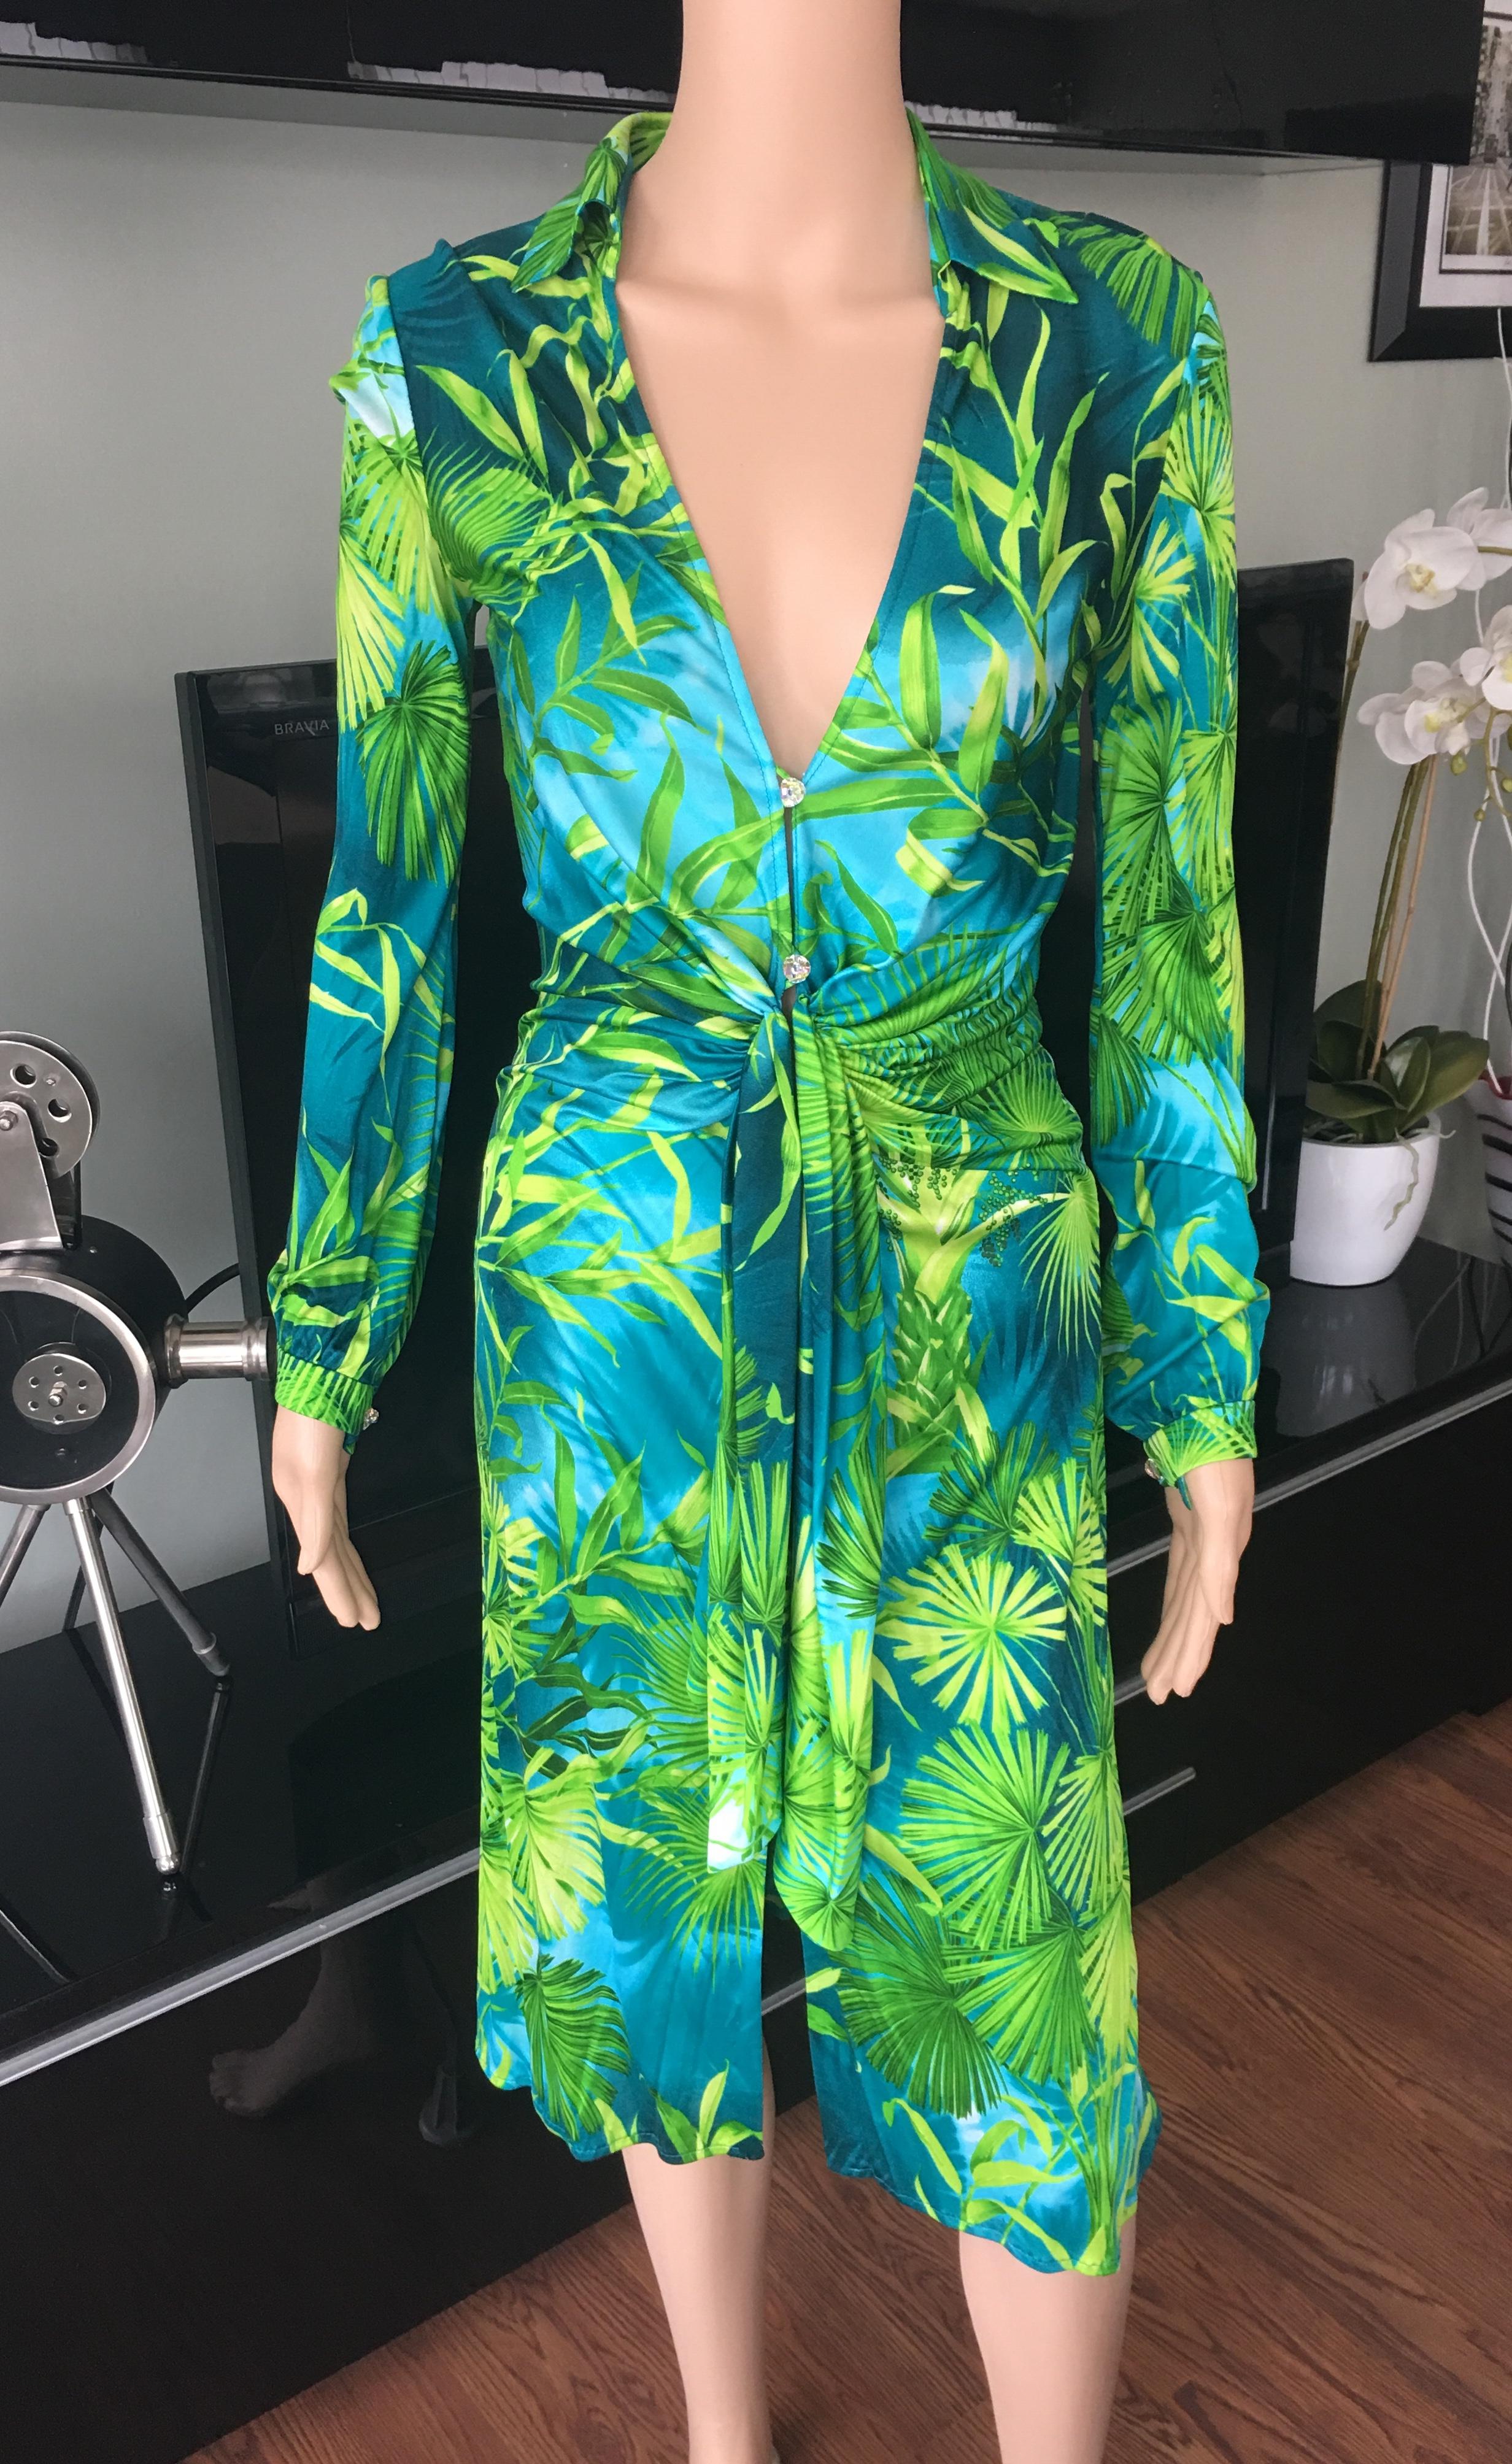 Look 1 from the Spring 2000 Collection. Green tropical palm print silk low cut dress from Gianni Versace Vintage featuring Swarovski crystal buttons, long sleeves, a plunged neckline style and a knee length. Size IT 38. Excellent Condition. Made in